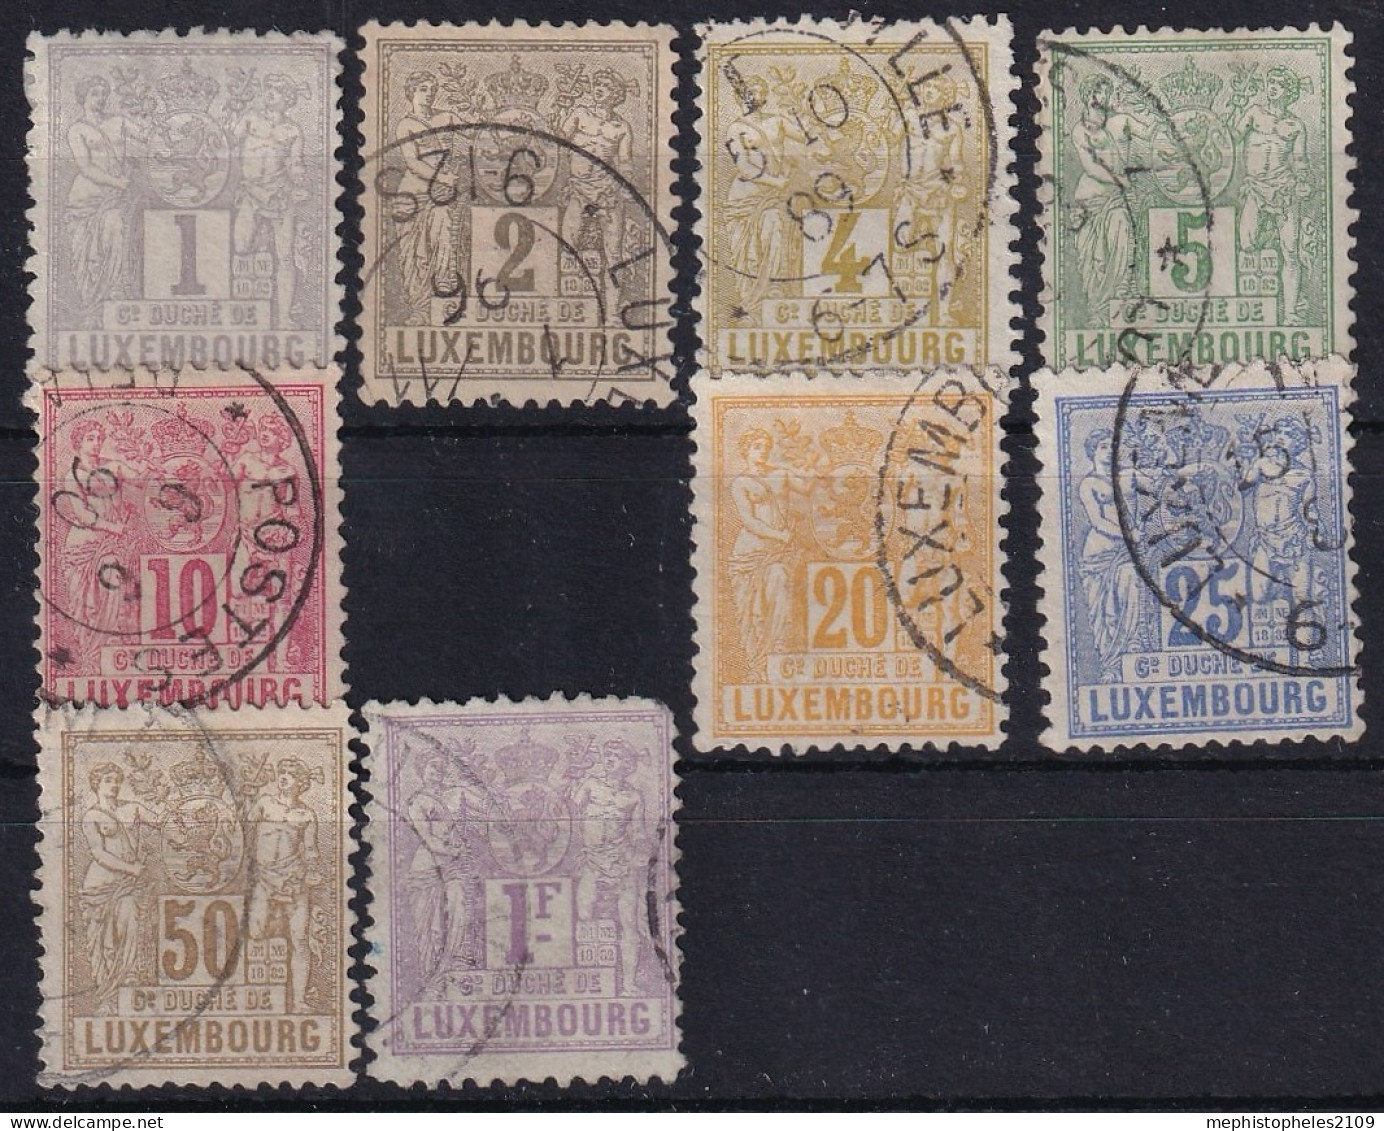 LUXEMBOURG 1882 - Canceled - Sc# 48-52, 54-58 - 1882 Allegory